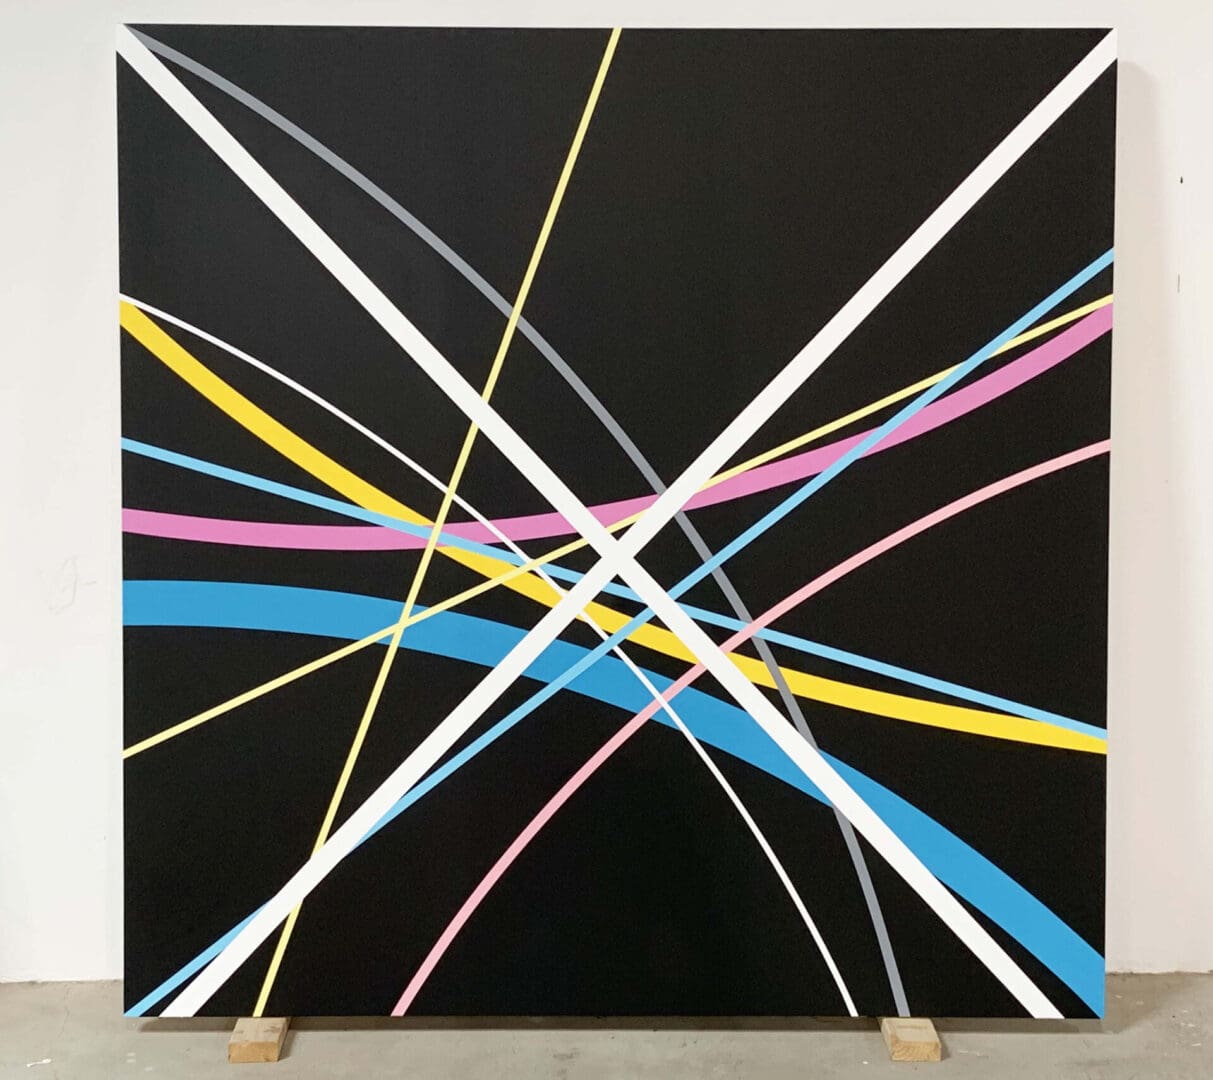 Clifford Singer. Xmax. 1984-2021. Acrylic on Canvas, 70 x 70 inches.